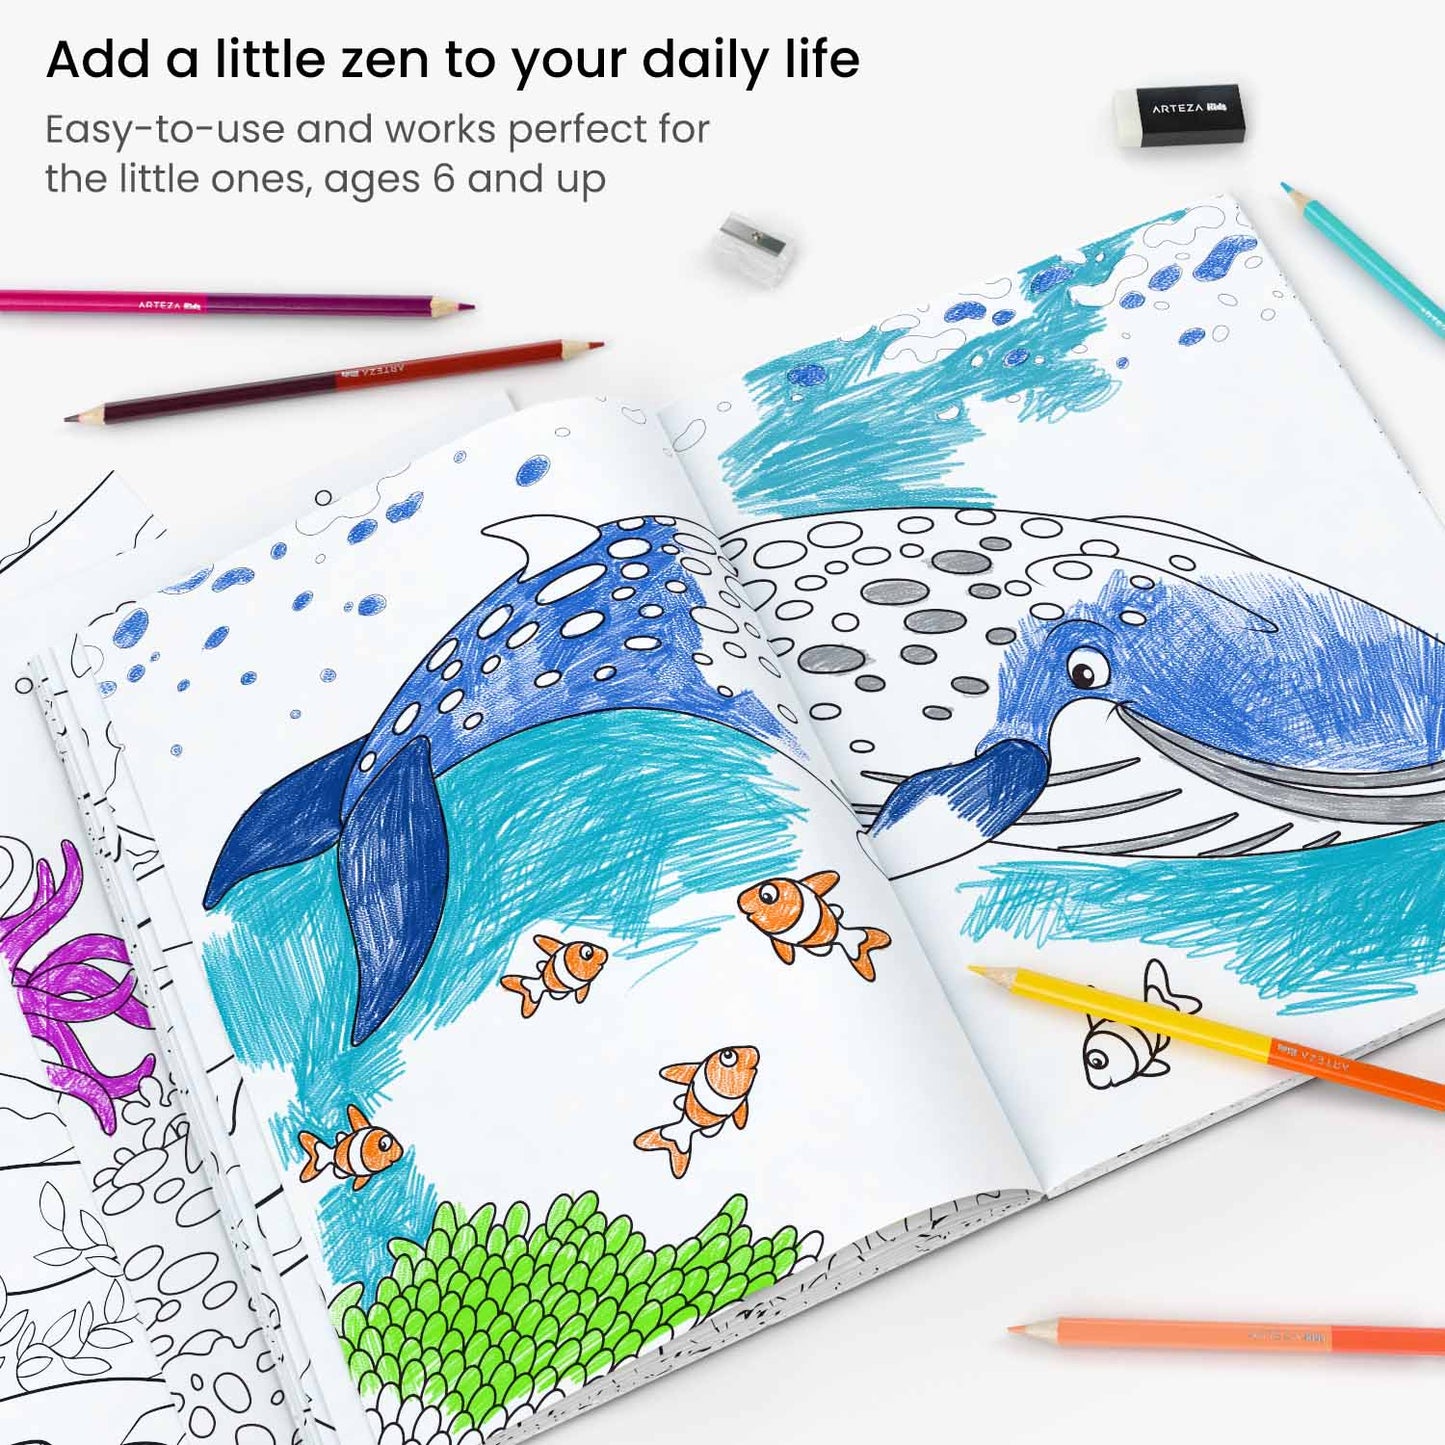 Kids Coloring Book Kit, Under the Sea